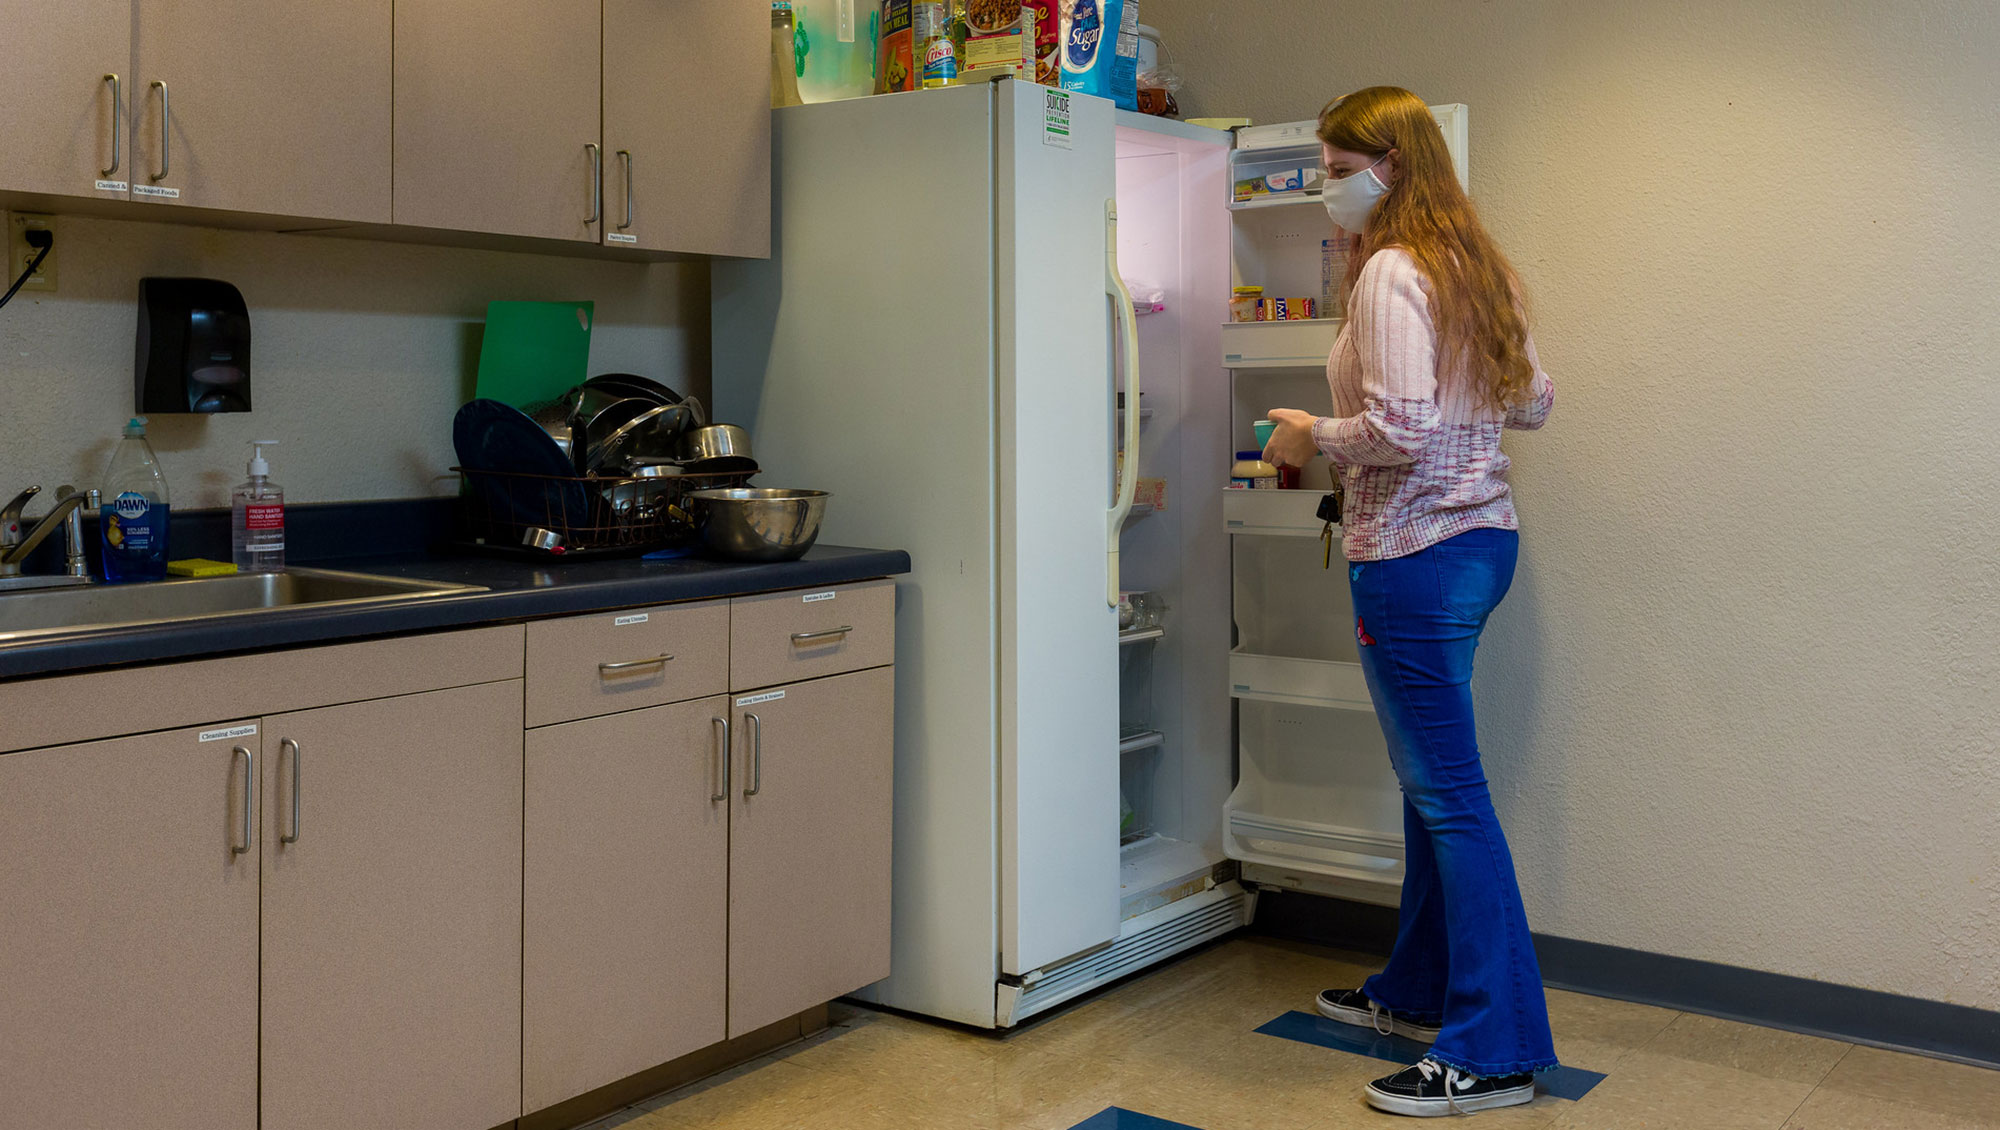 Dorm student taking food out of refridgerator in residence hall kitchen